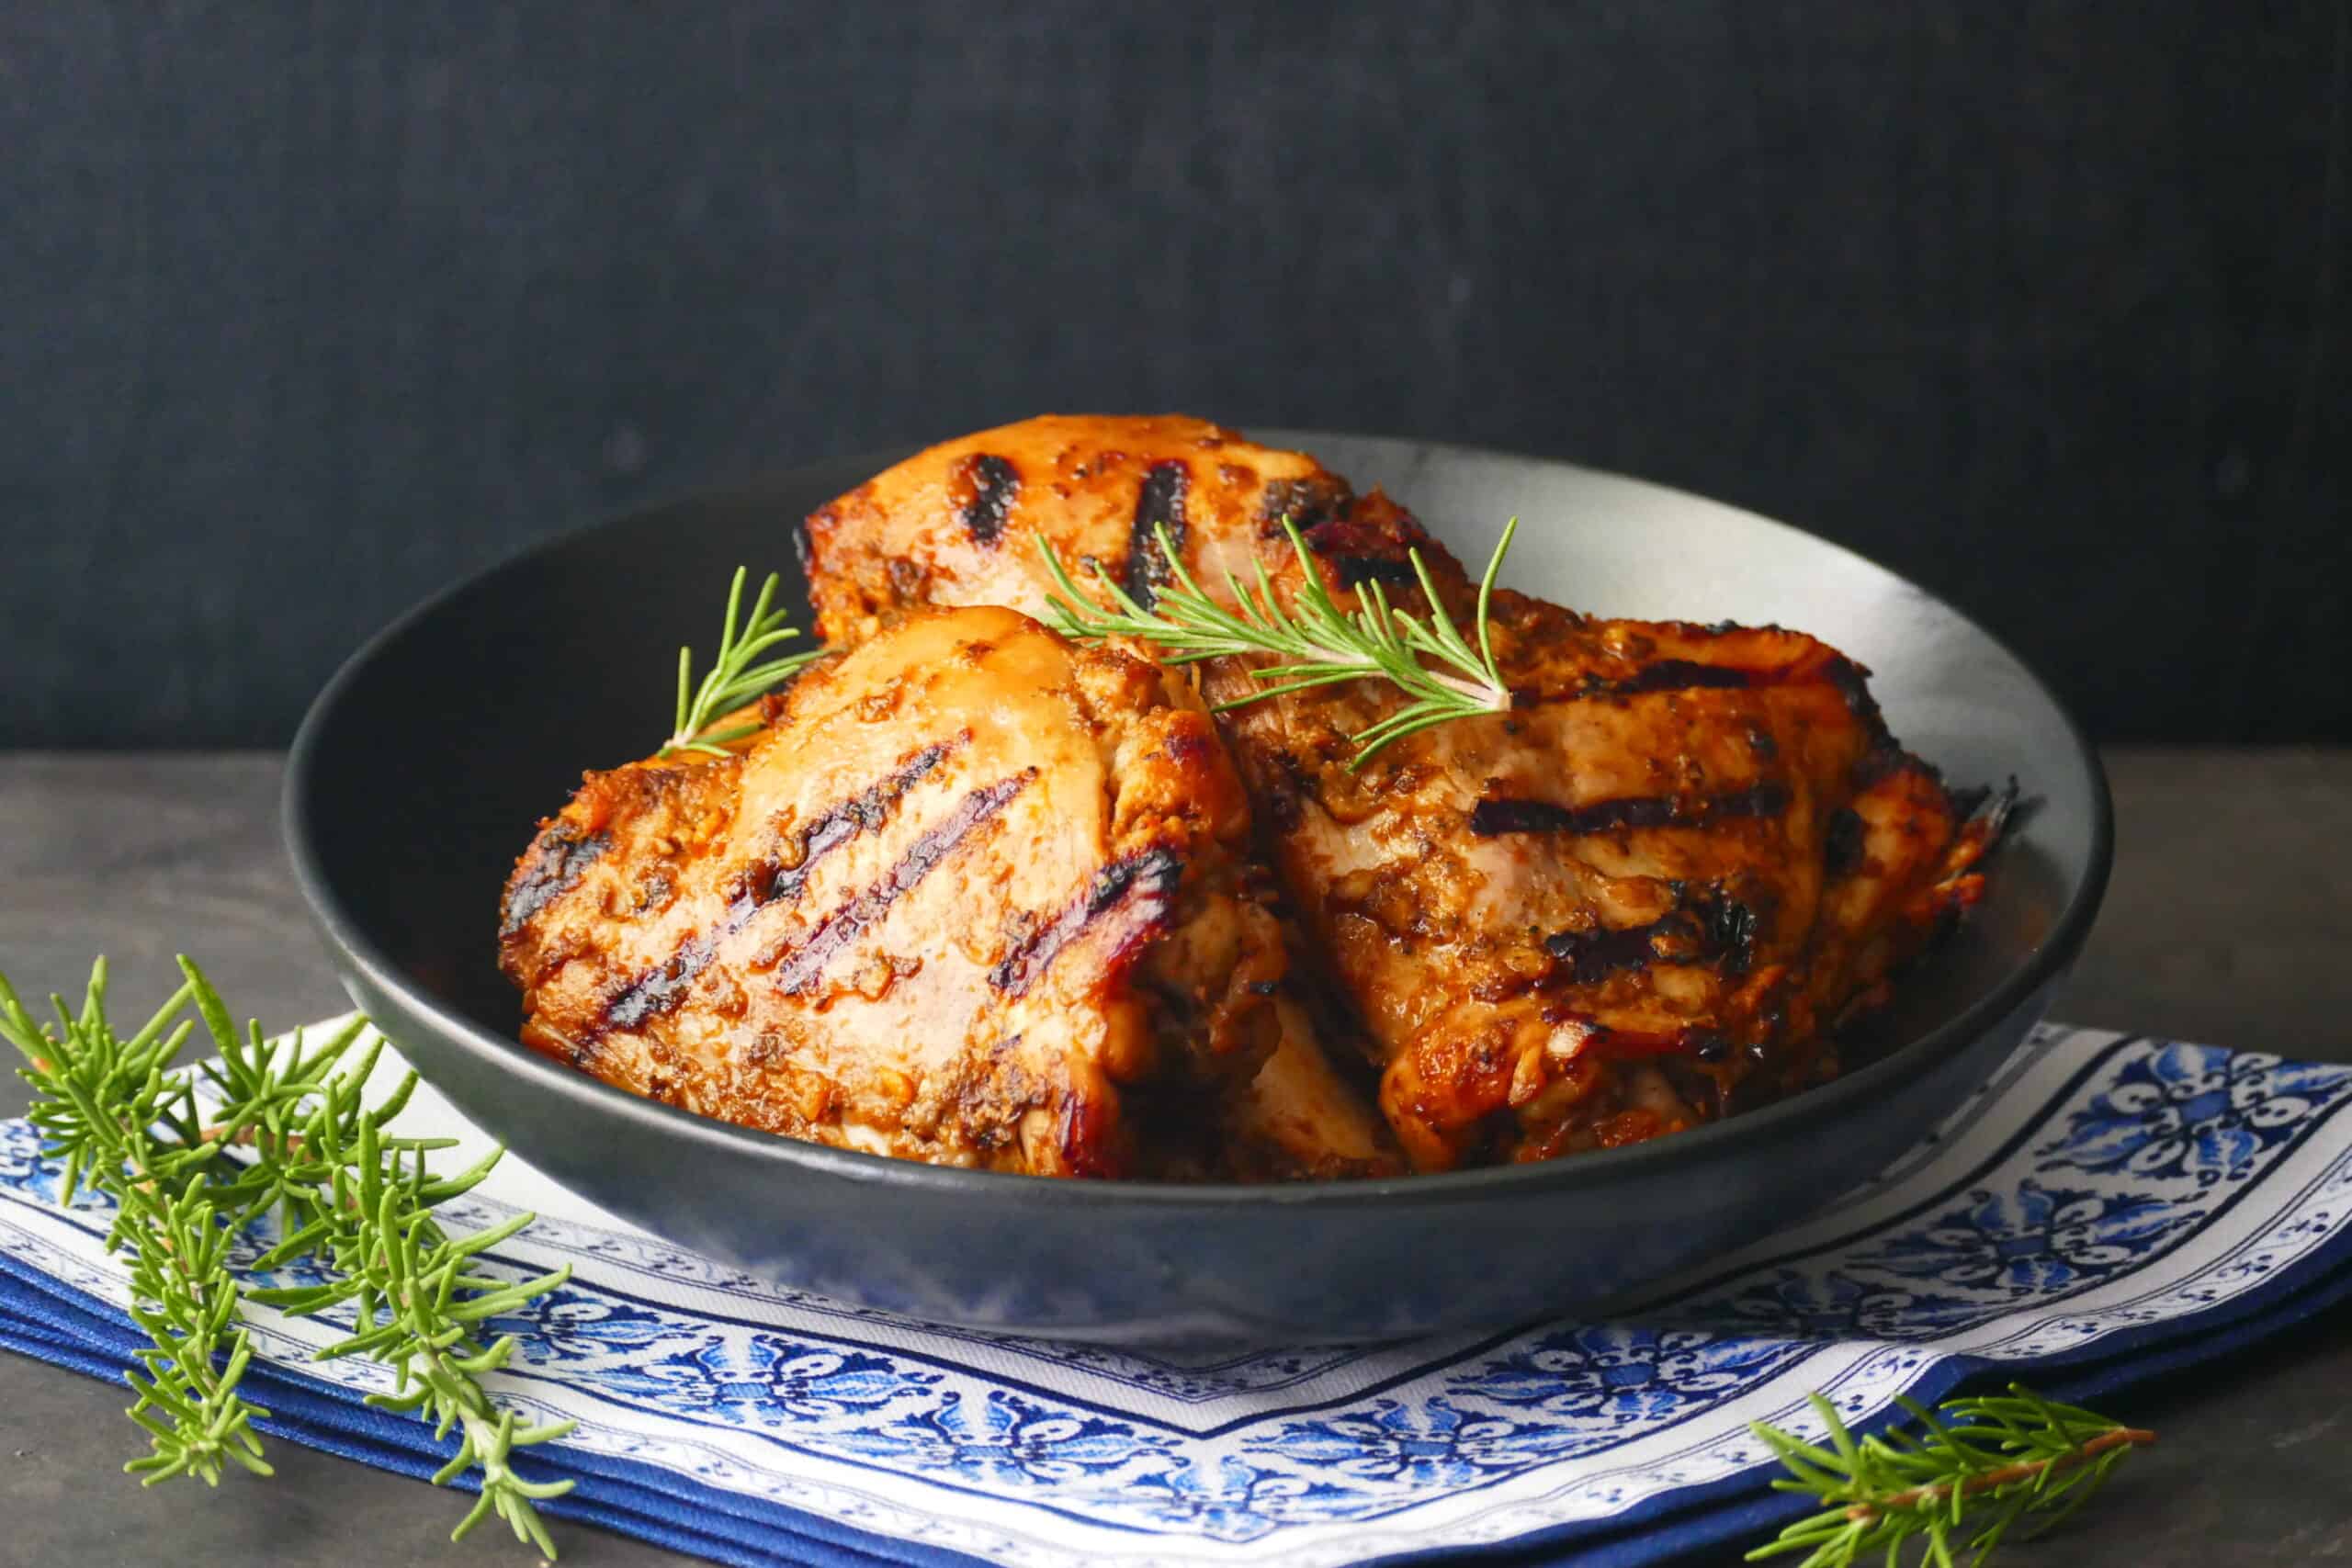 Grilled peri peri chicken pieces stacked in black plate on blue and white napkin with rosemary garnish